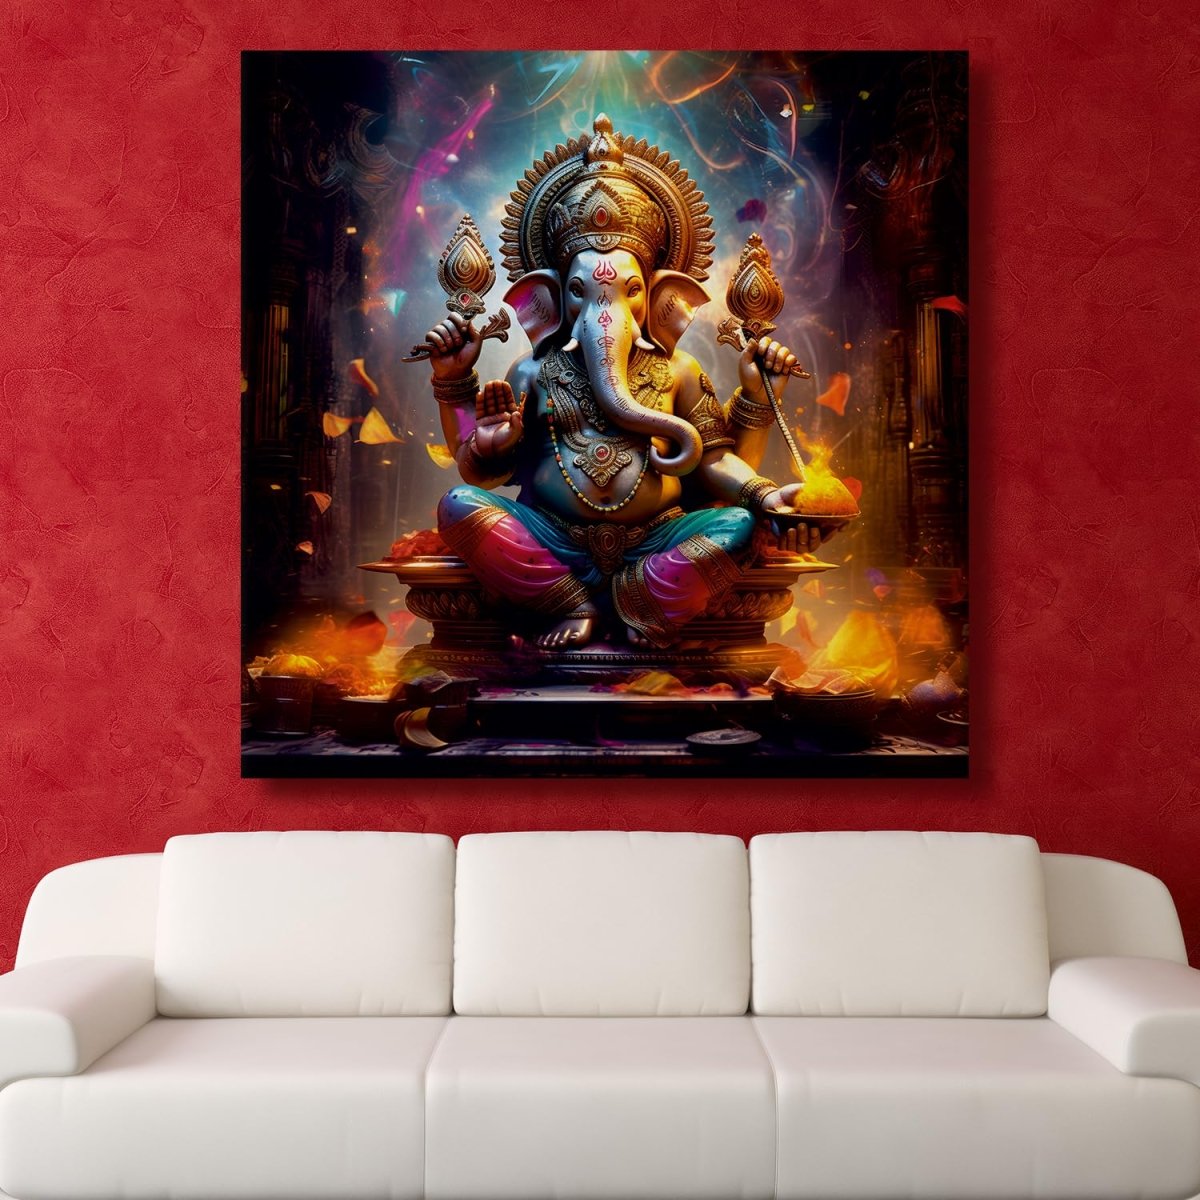 Ganesha The Lord of Beginnings Canvas Wall art (36 x 36 Inches)